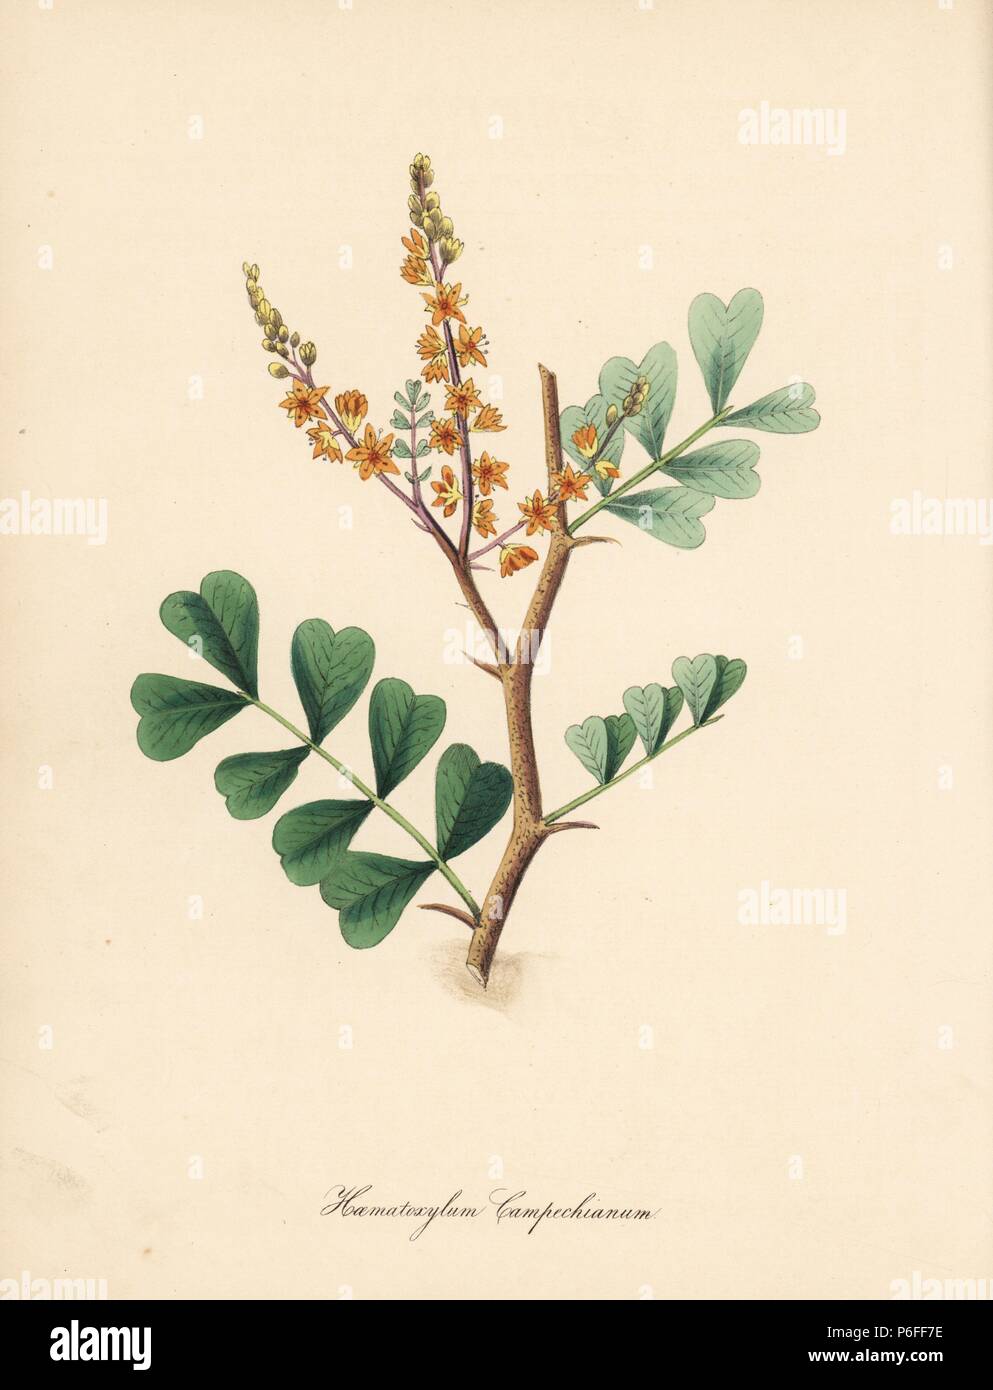 Logwood tree, Haematoxylum campechianum. Handcoloured zincograph by C. Chabot drawn by Miss M. A. Burnett from her 'Plantae Utiliores: or Illustrations of Useful Plants,' Whittaker, London, 1842. Miss Burnett drew the botanical illustrations, but the text was chiefly by her late brother, British botanist Gilbert Thomas Burnett (1800-1835). Stock Photo